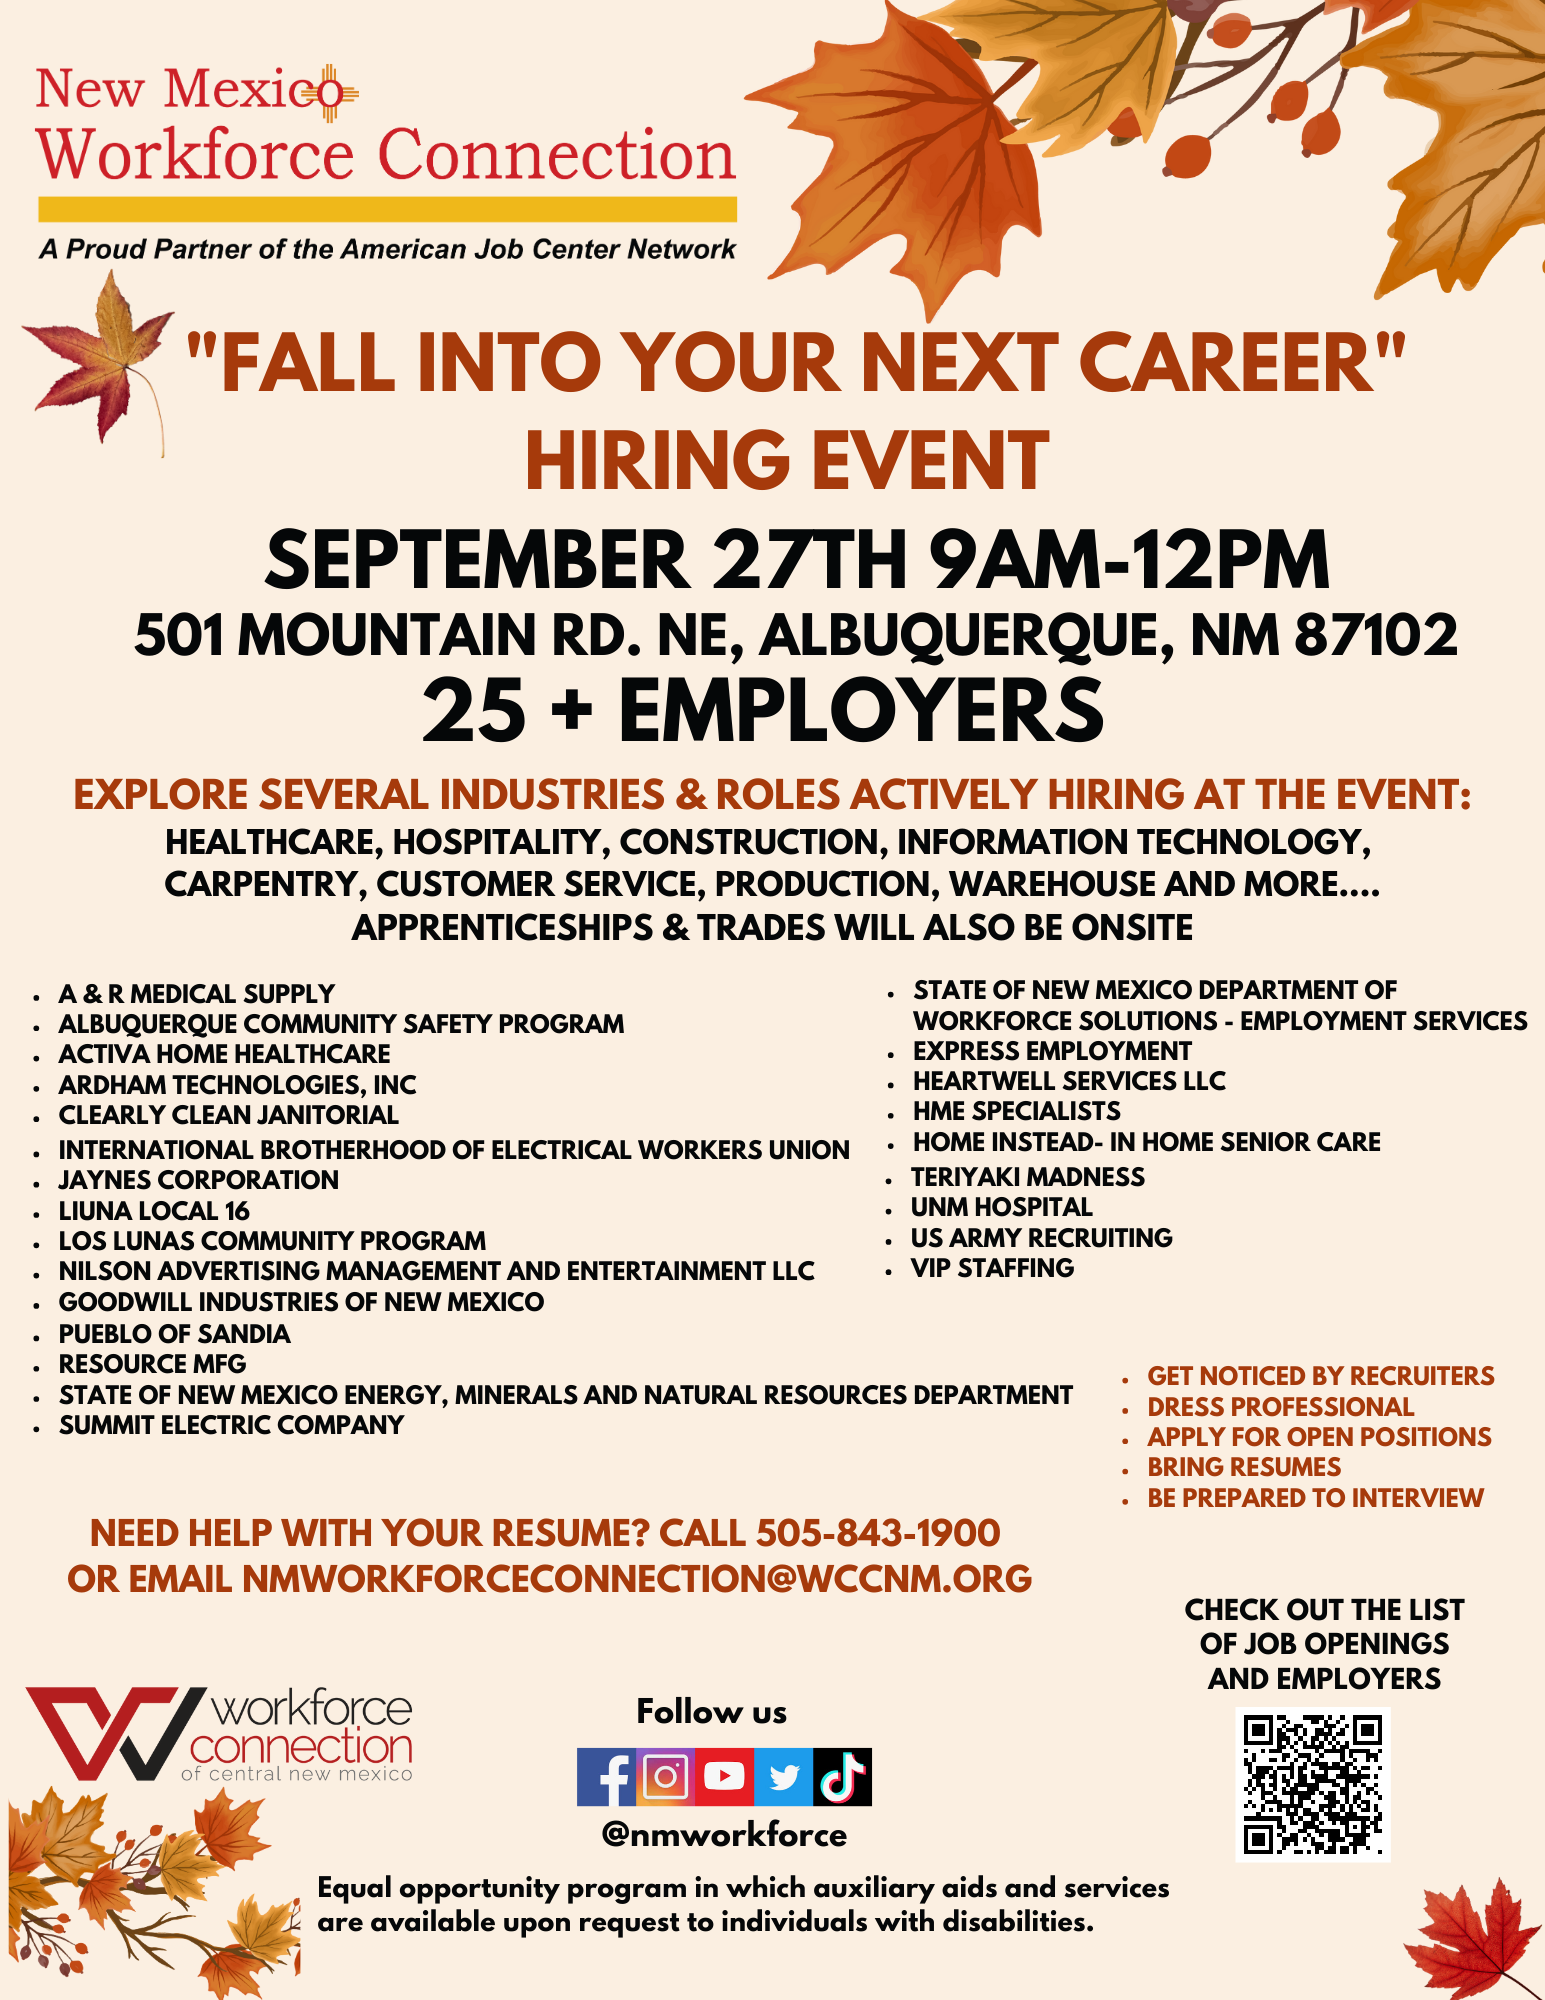 Fall Into Your Next Career Hiring Event flyer